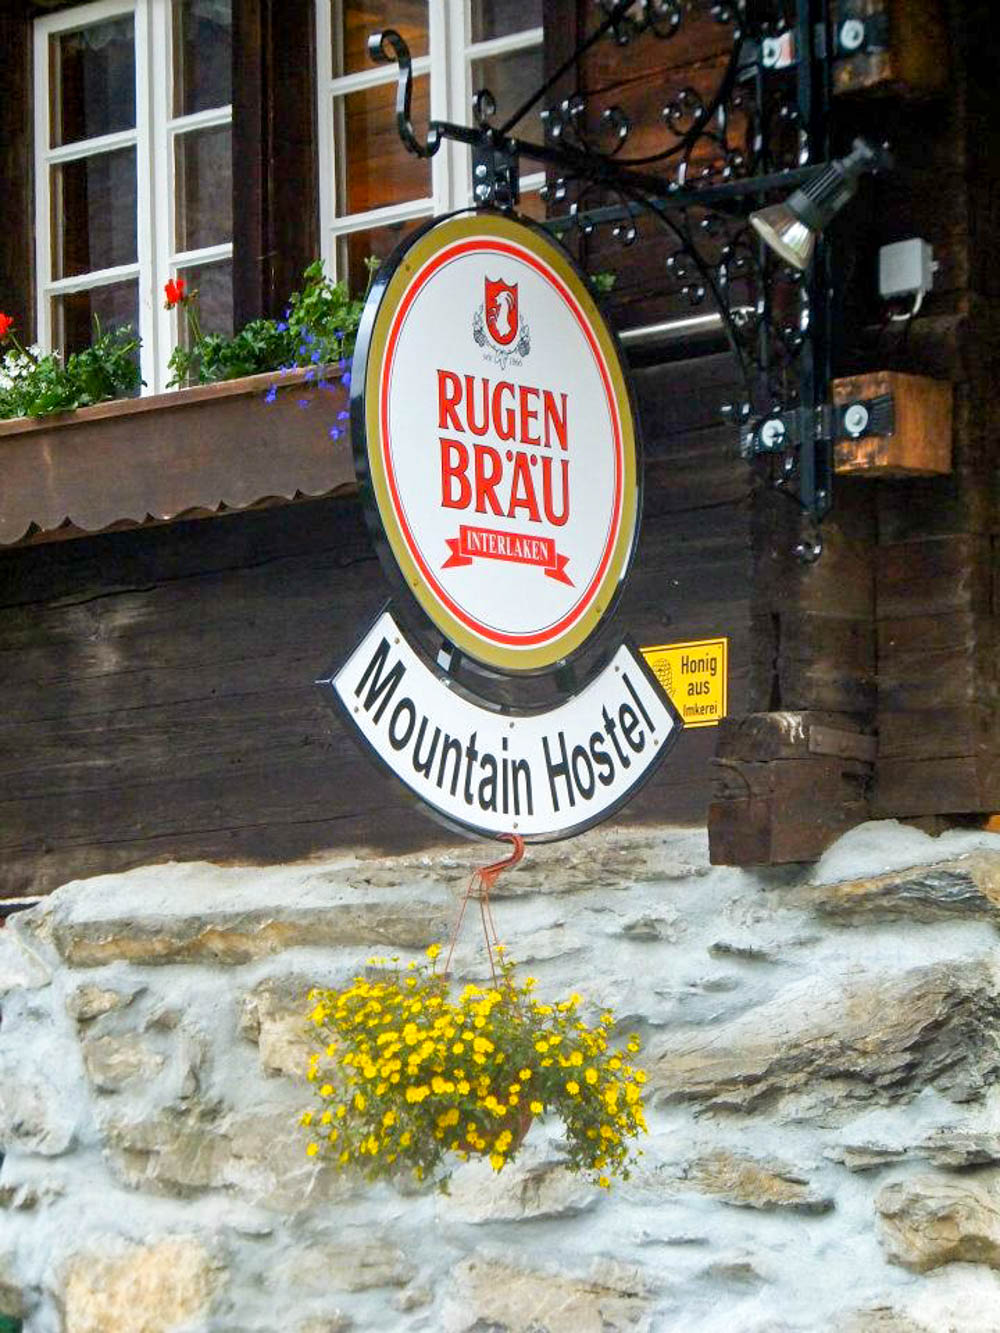 Rugenbrau beer at Mountain Hostel | Where to stay in Gimmelwald, Switzerland: Mountain Hostels and B&Bs | Best places to stay in Gimmelwald